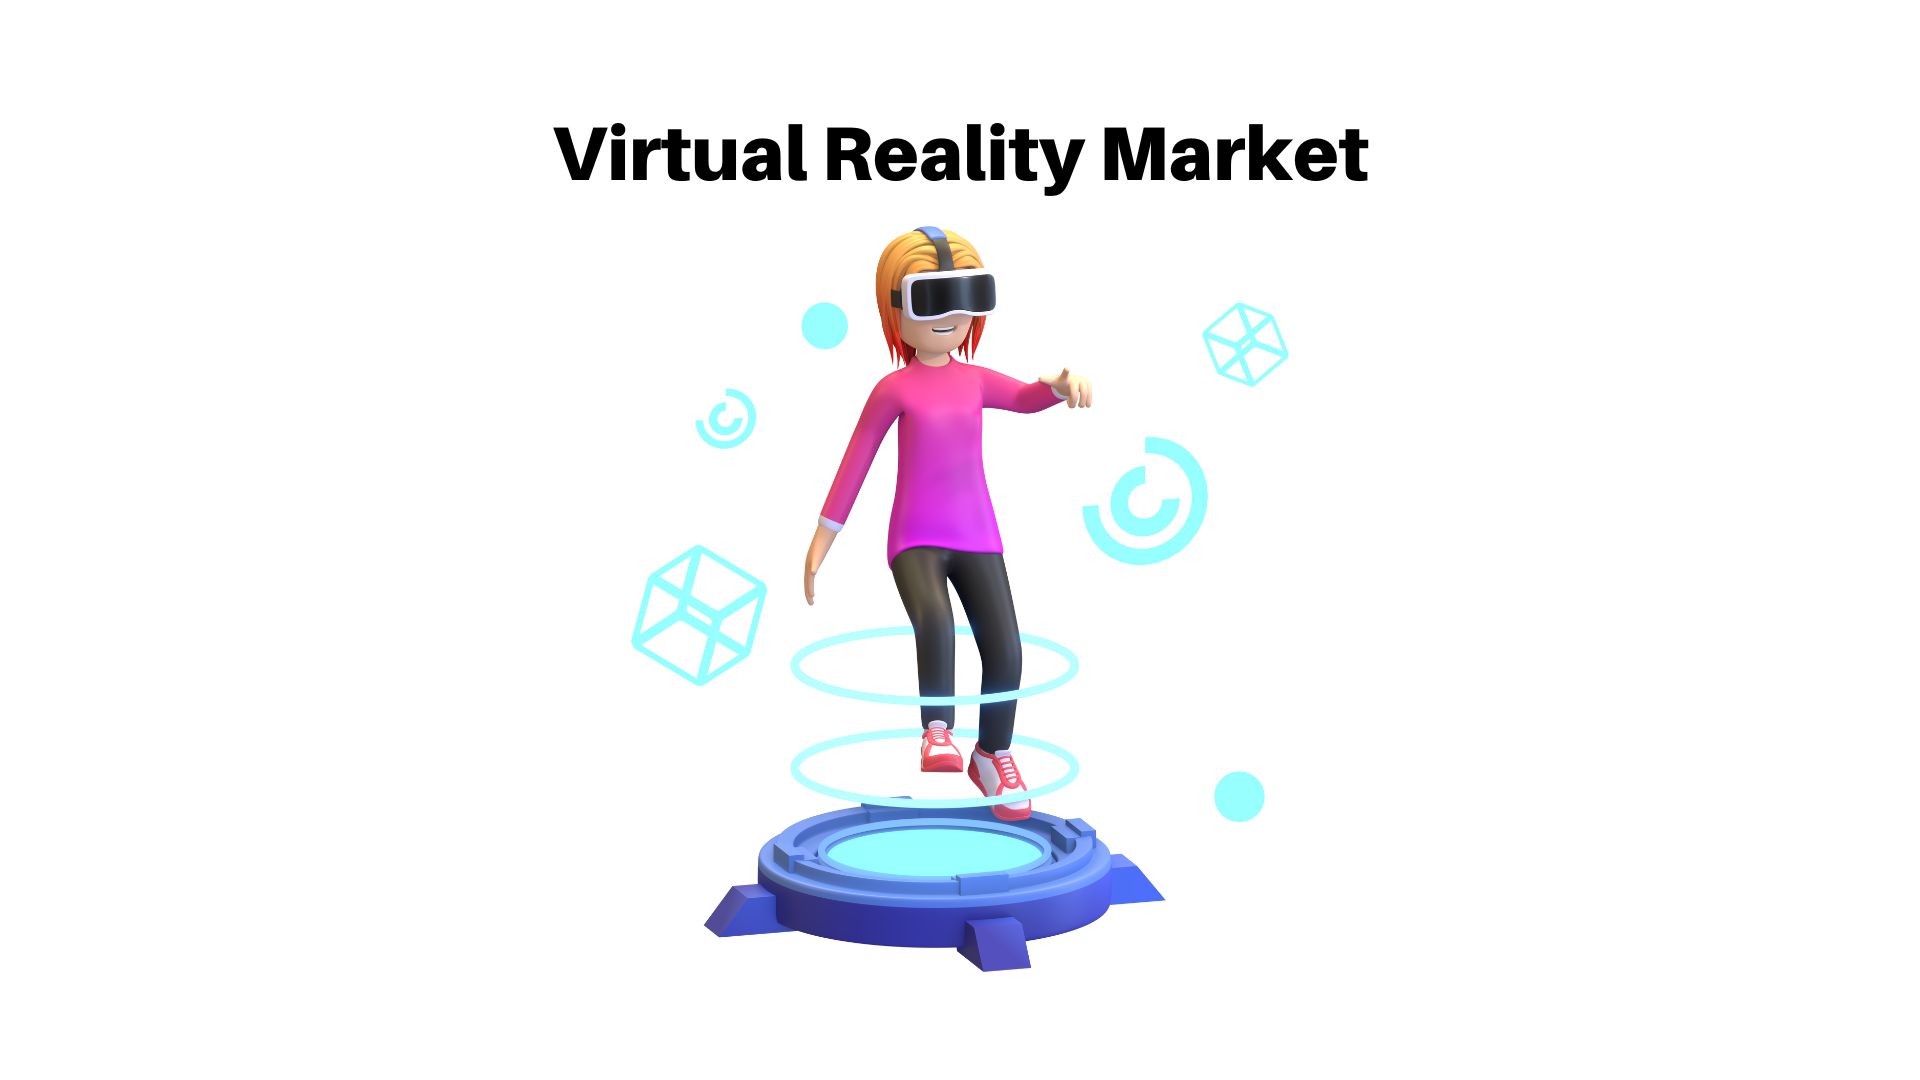 Virtual Reality Market Globally Expected to Drive Growth Nearly USD 1022.24 Bn By 2033